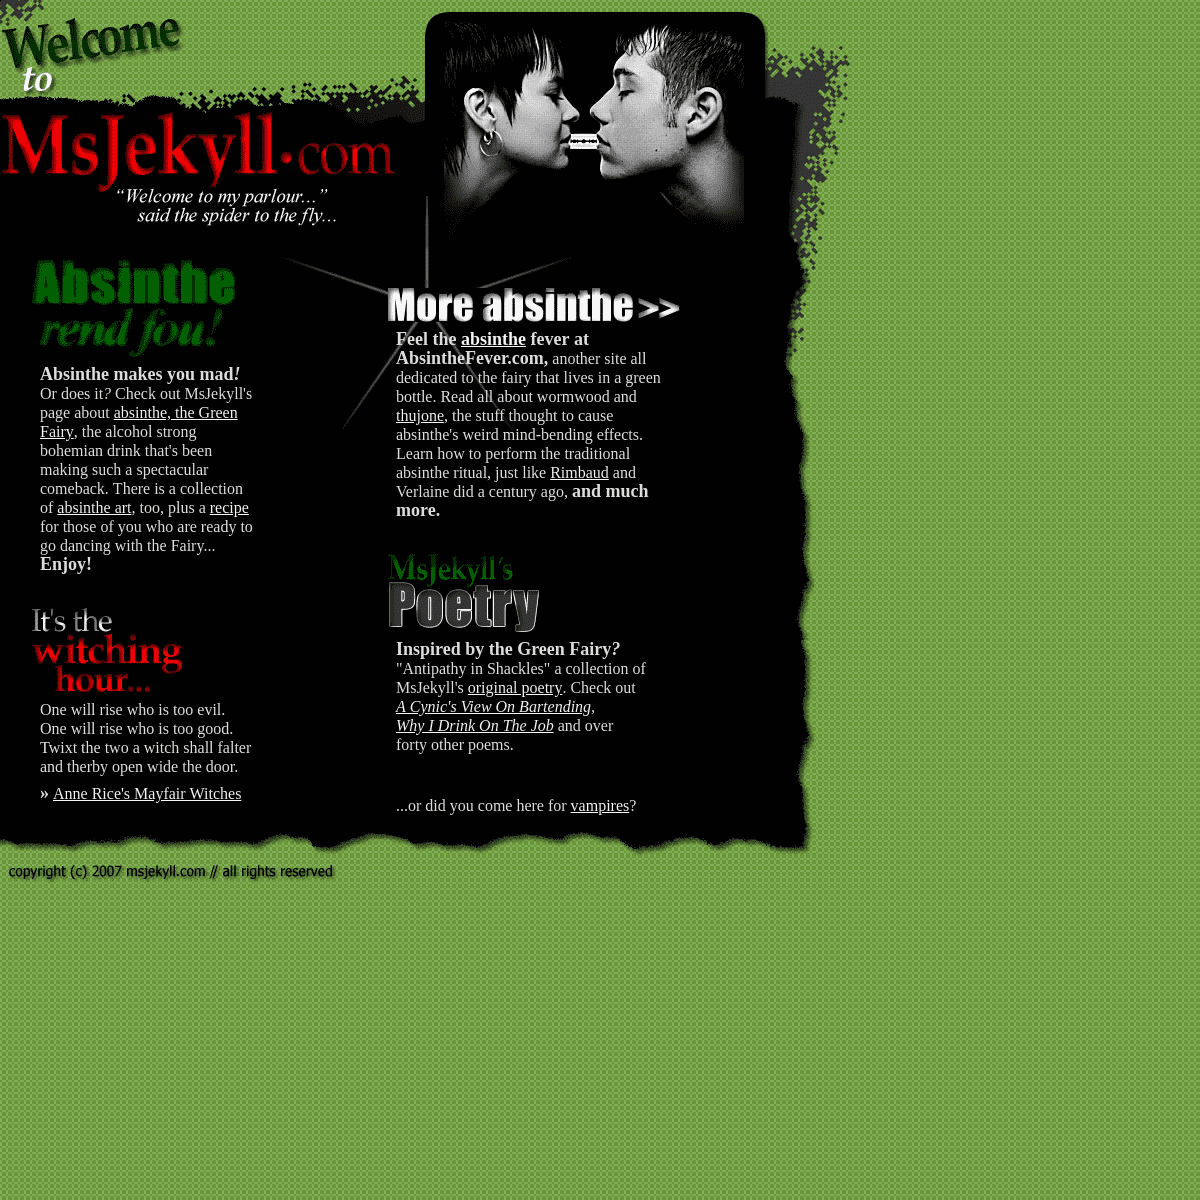 About Absinthe, Absinthe Art, Poetry and Magic - Welcome to MsJekyll!